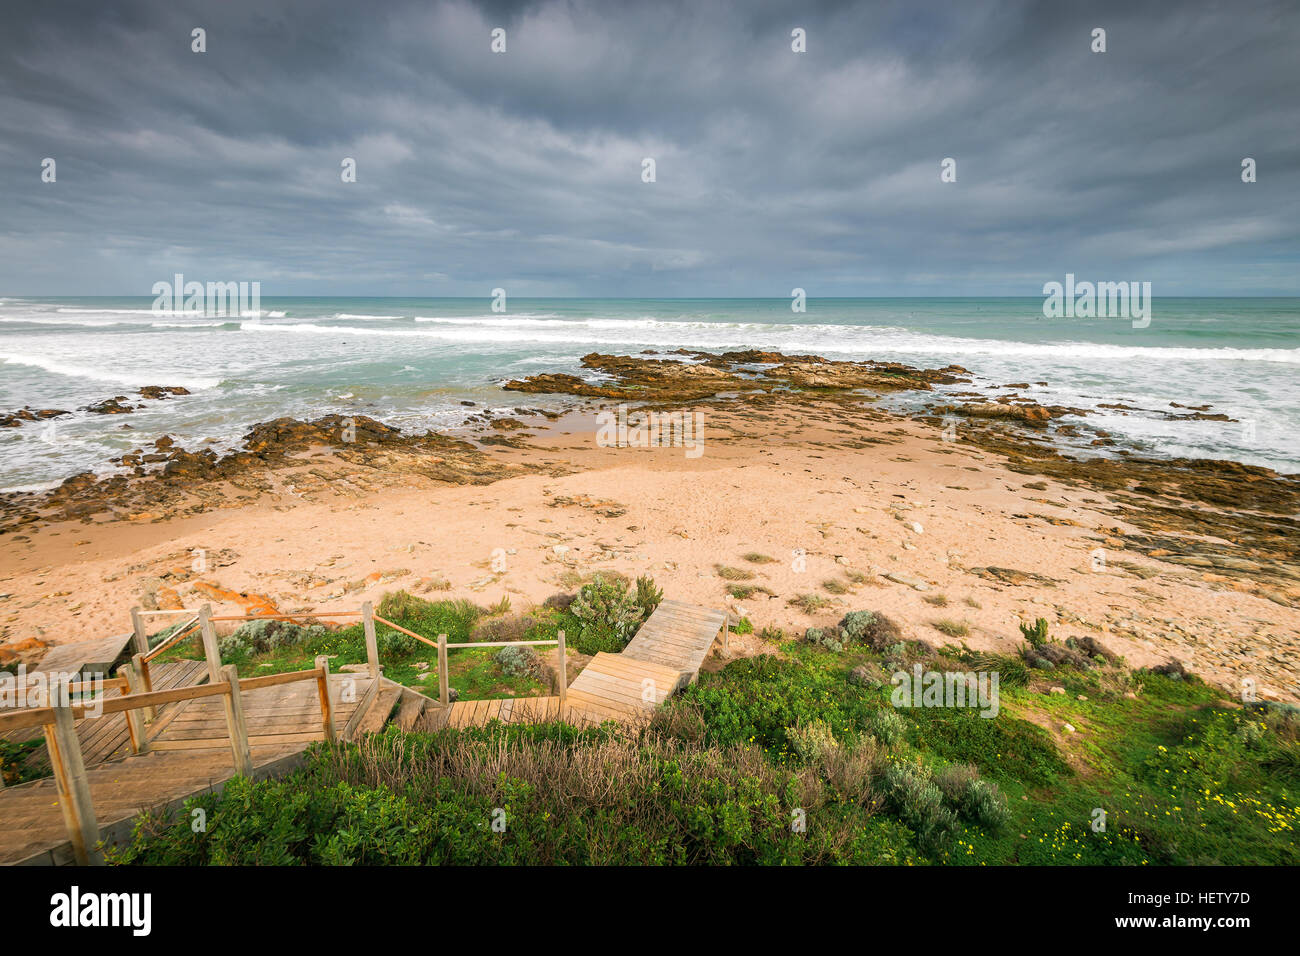 Pathway with picturesque view at Surfers beach at  Middleton, South Australia Stock Photo